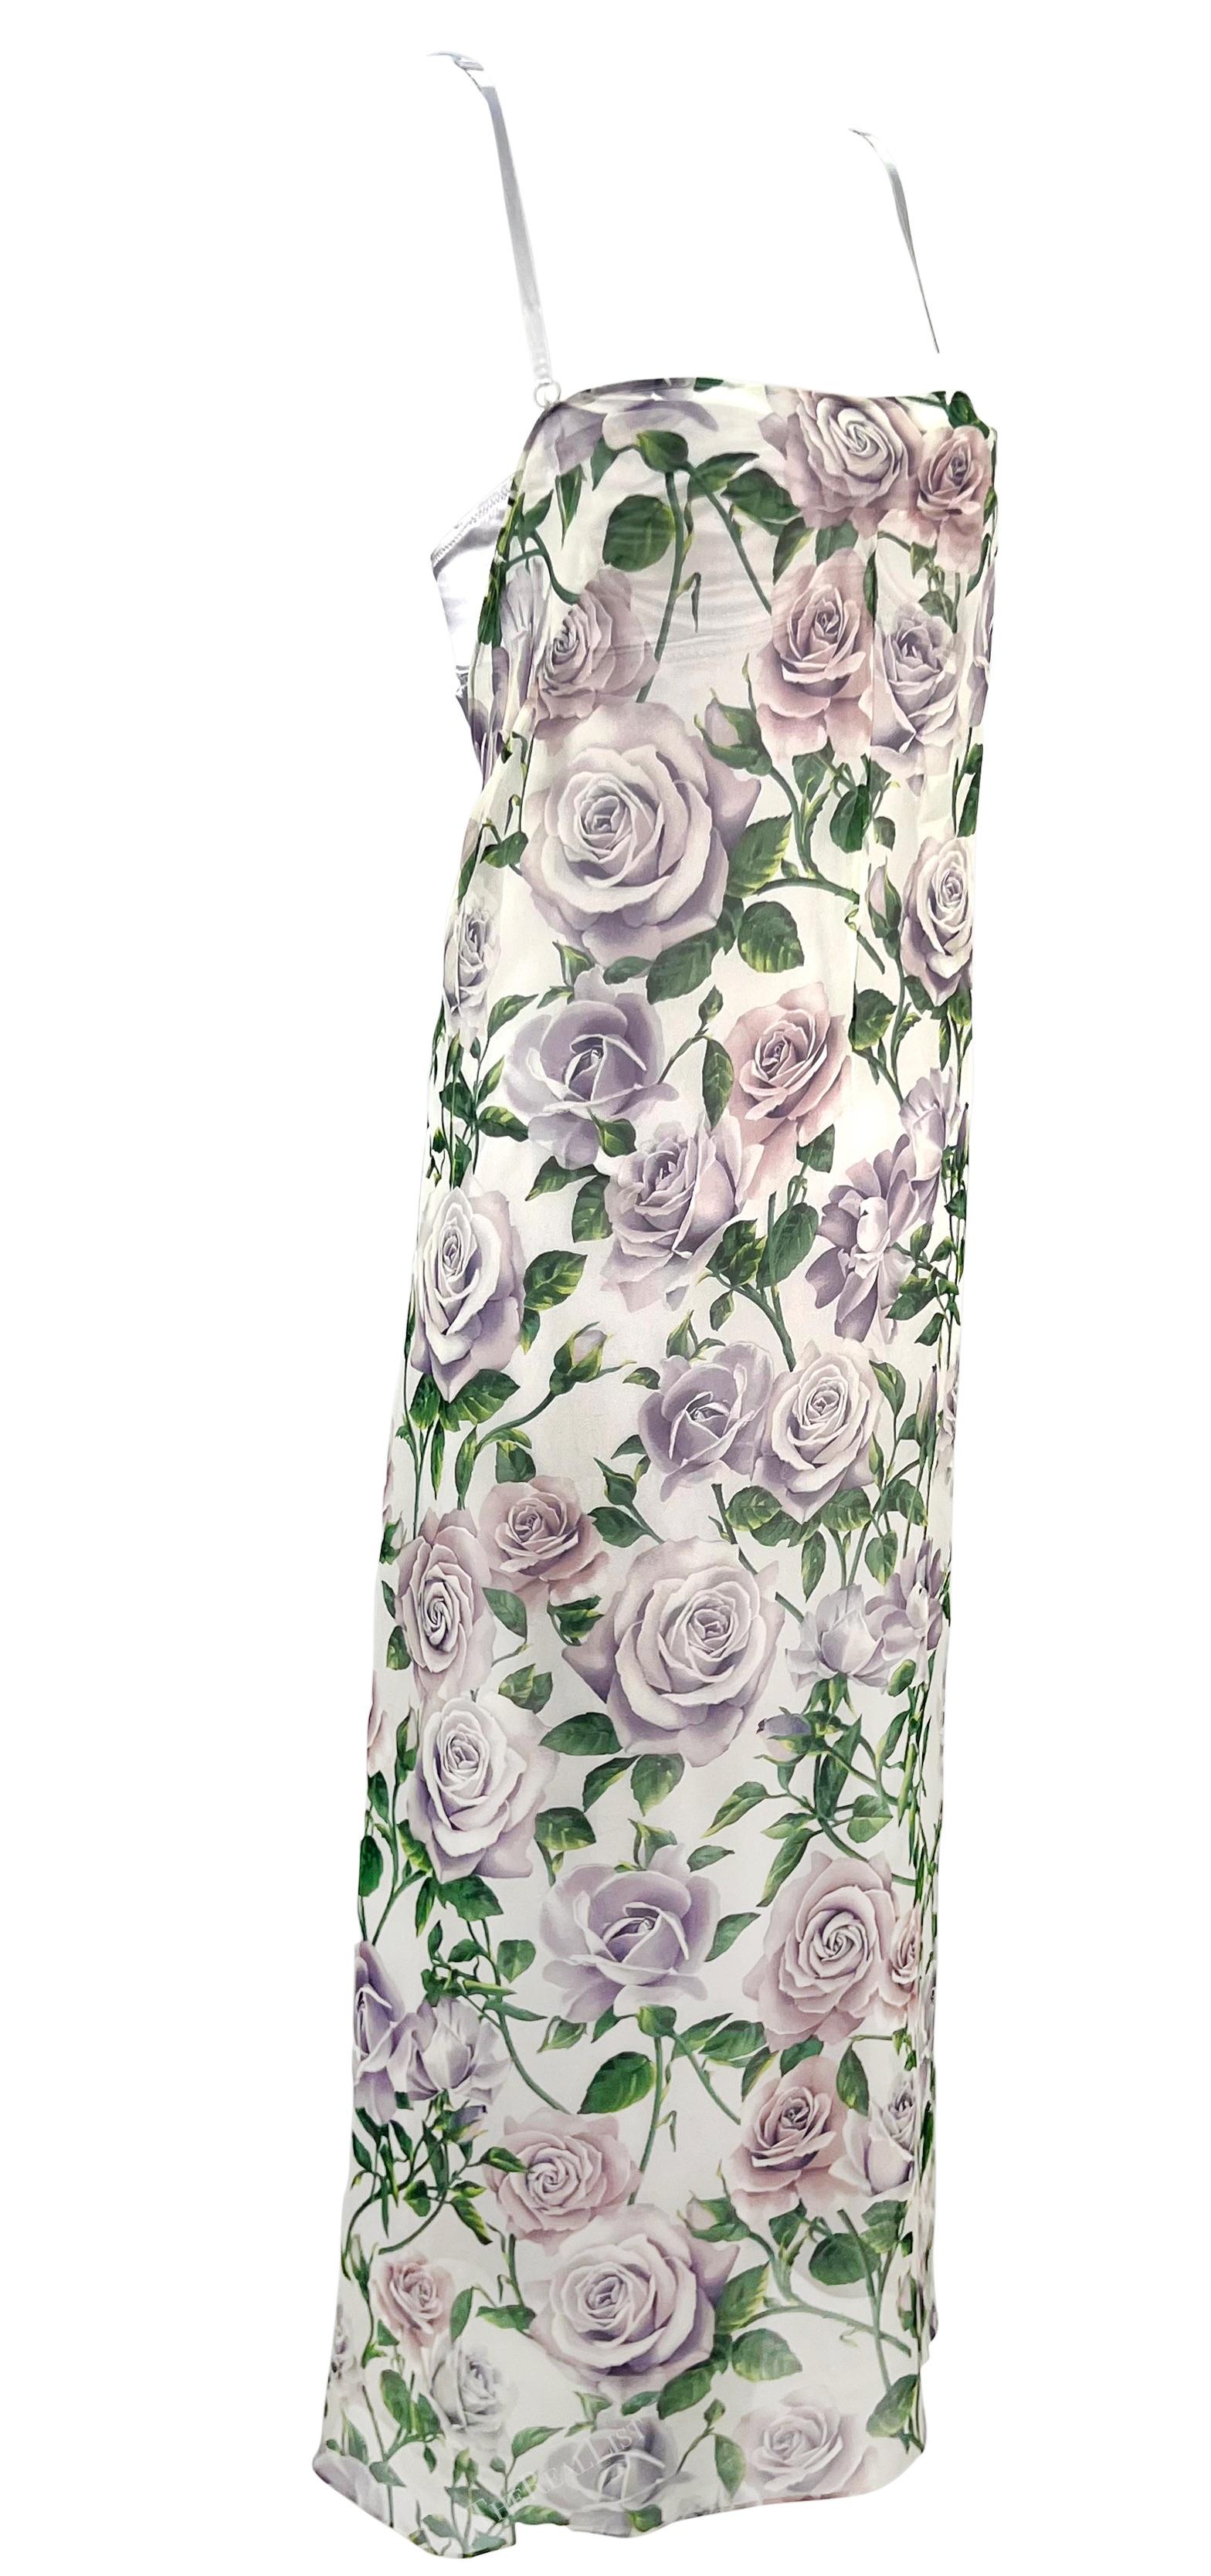 Early 2000s Dolce & Gabbana Sheer Chiffon White Purple Rose Print Overlay Gown For Sale 2